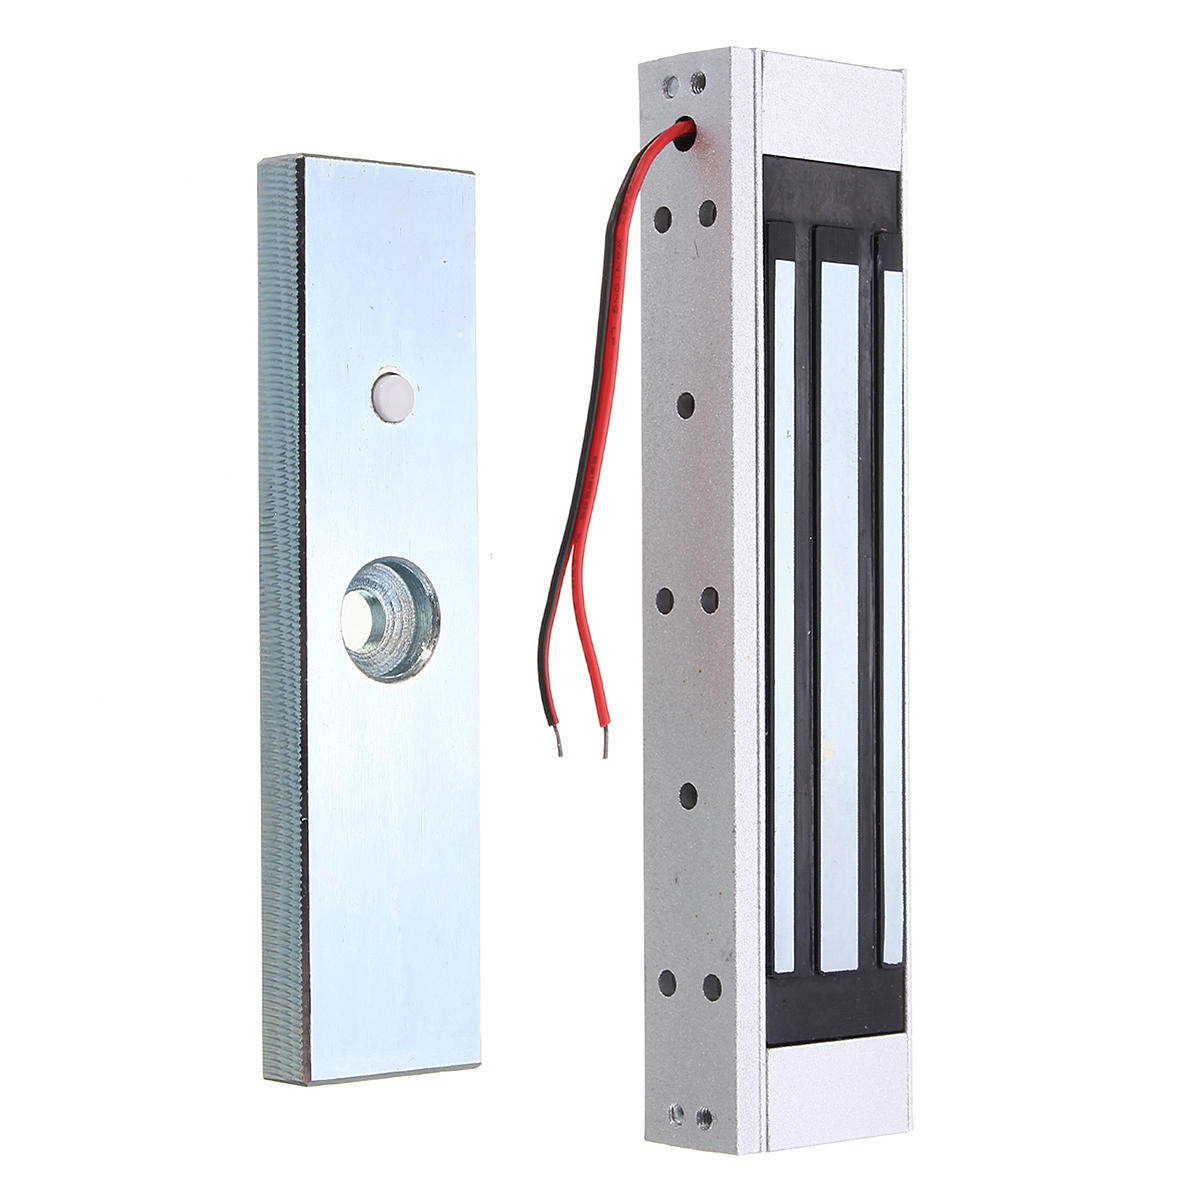 Details about   12V Electric Magnetic Door Lock Electromagnetic & Access Control 180KG